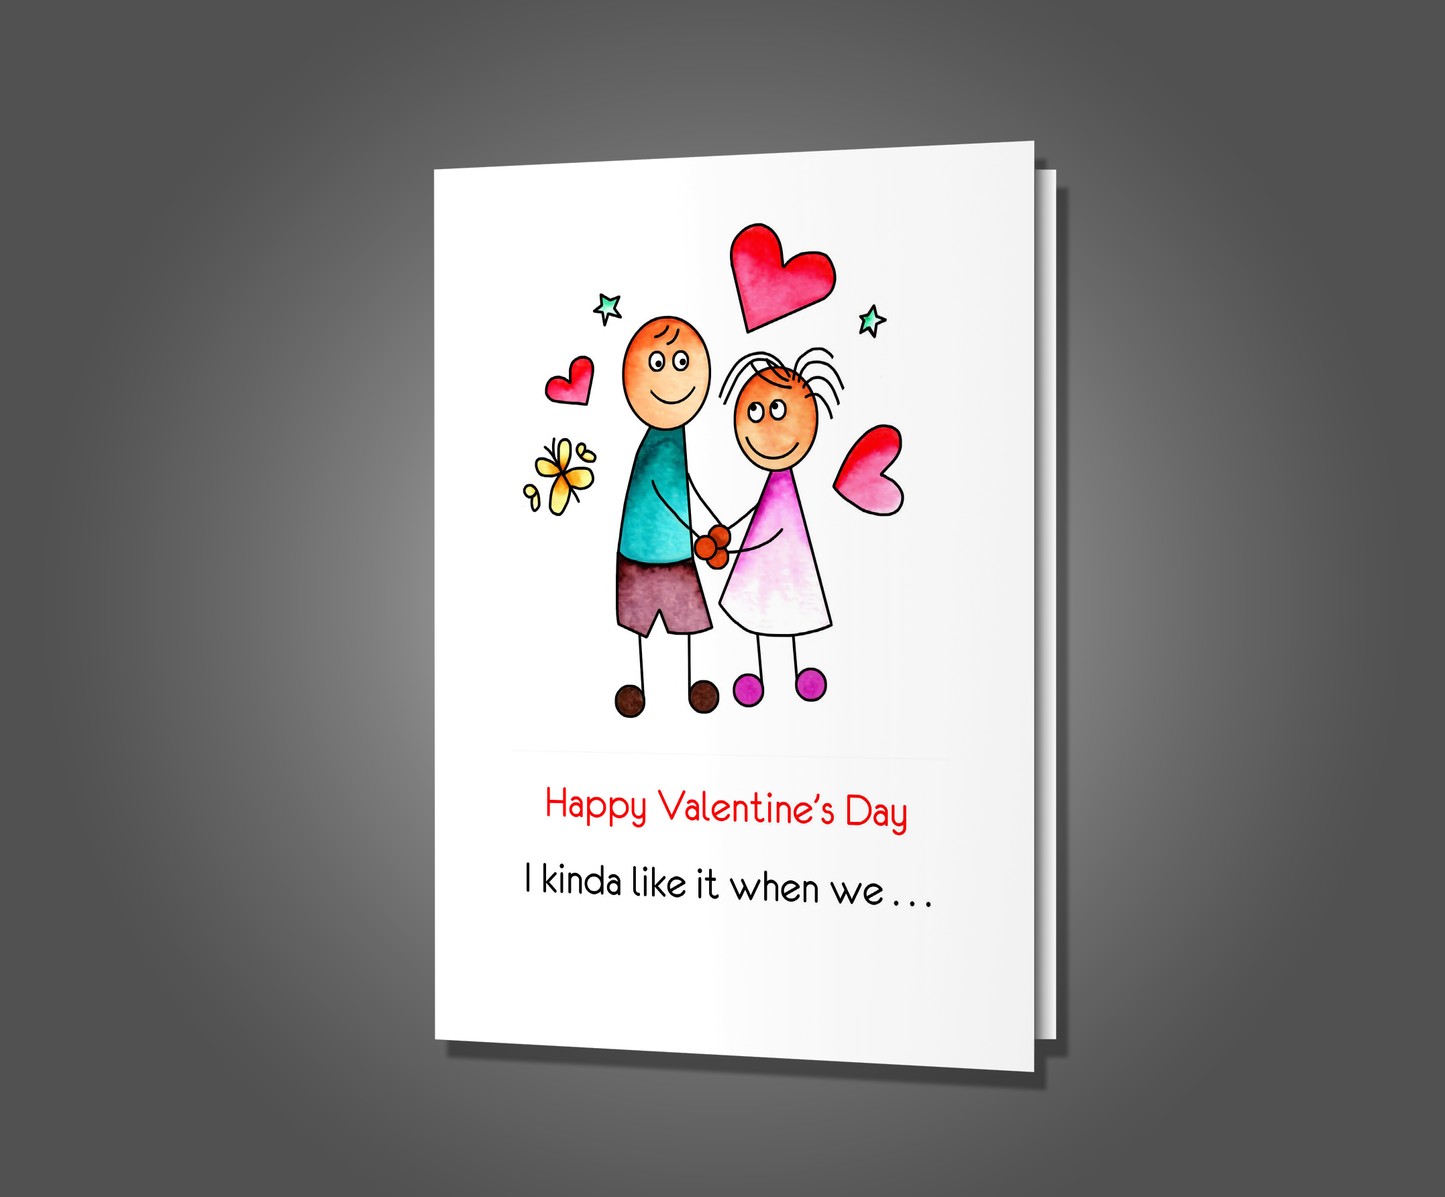 Funny Valentine's day card with a man and woman holding hands drawn on front of the card. Inside the card is a funny joke that says I would rather look at your balls instead of your face.